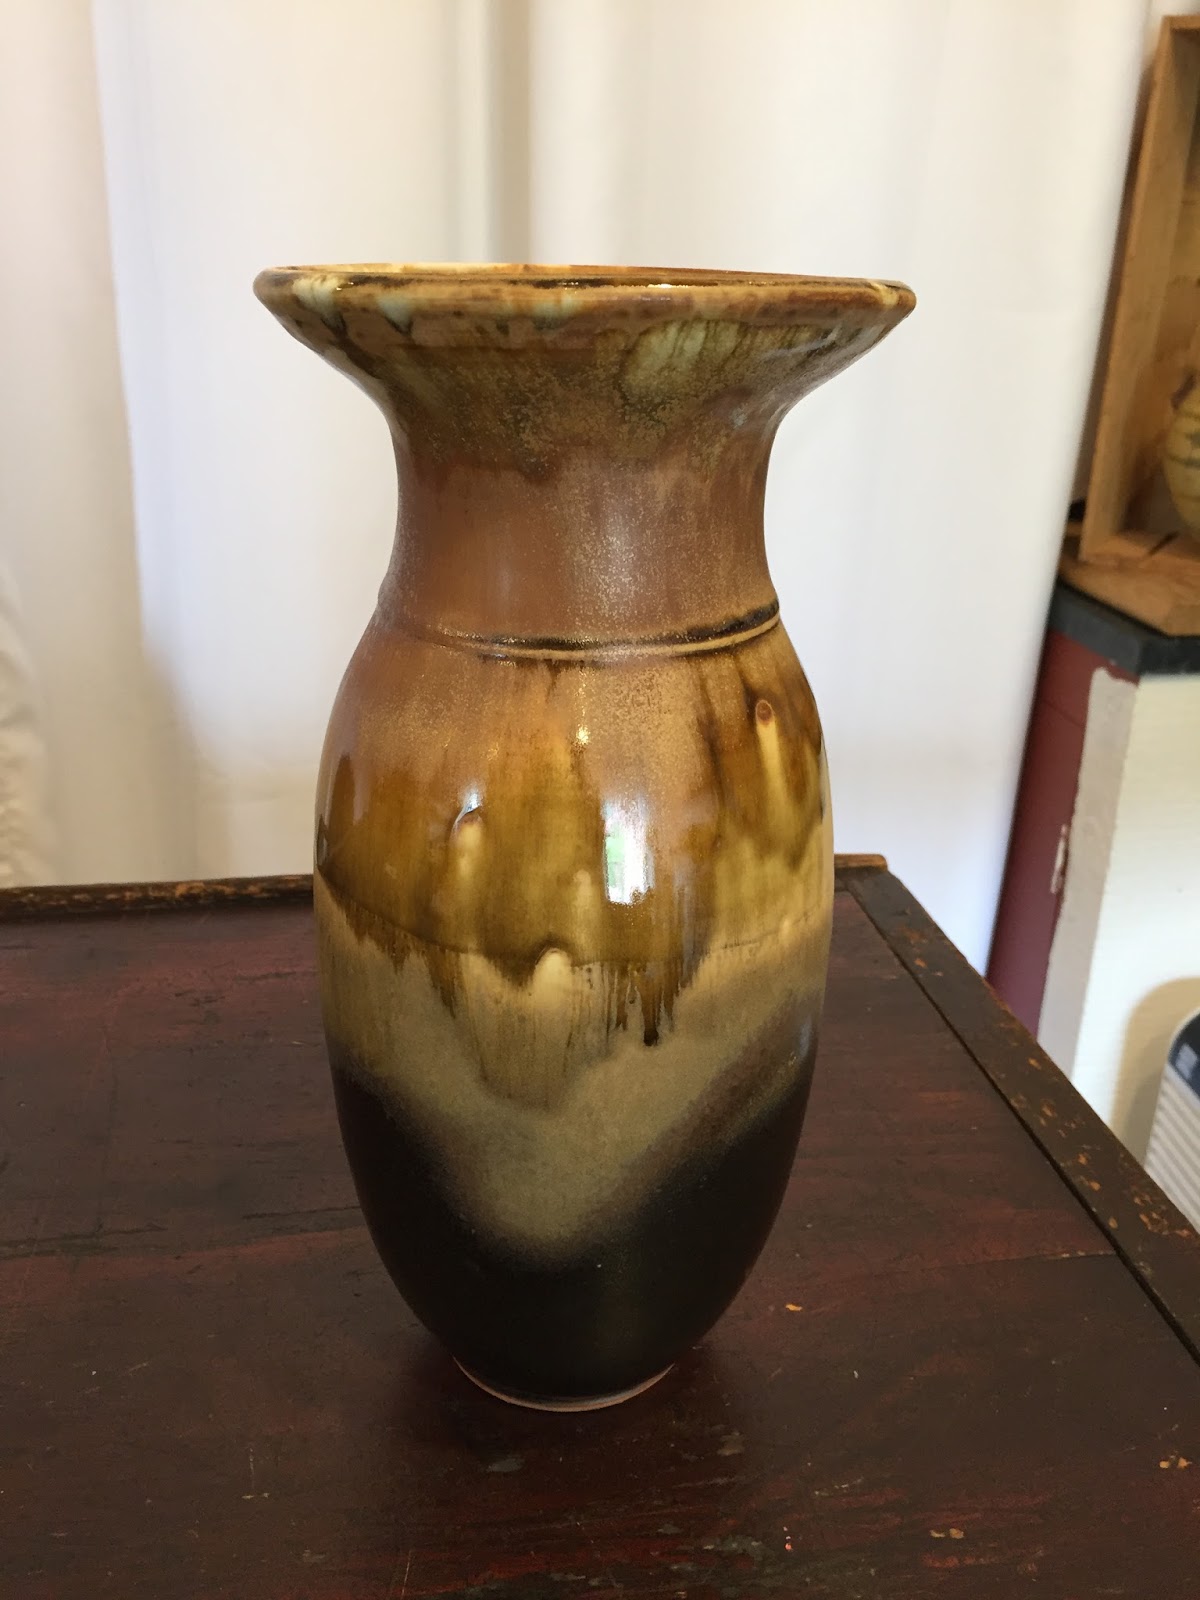 Joe Straka: Magpie Pottery: More Pictures